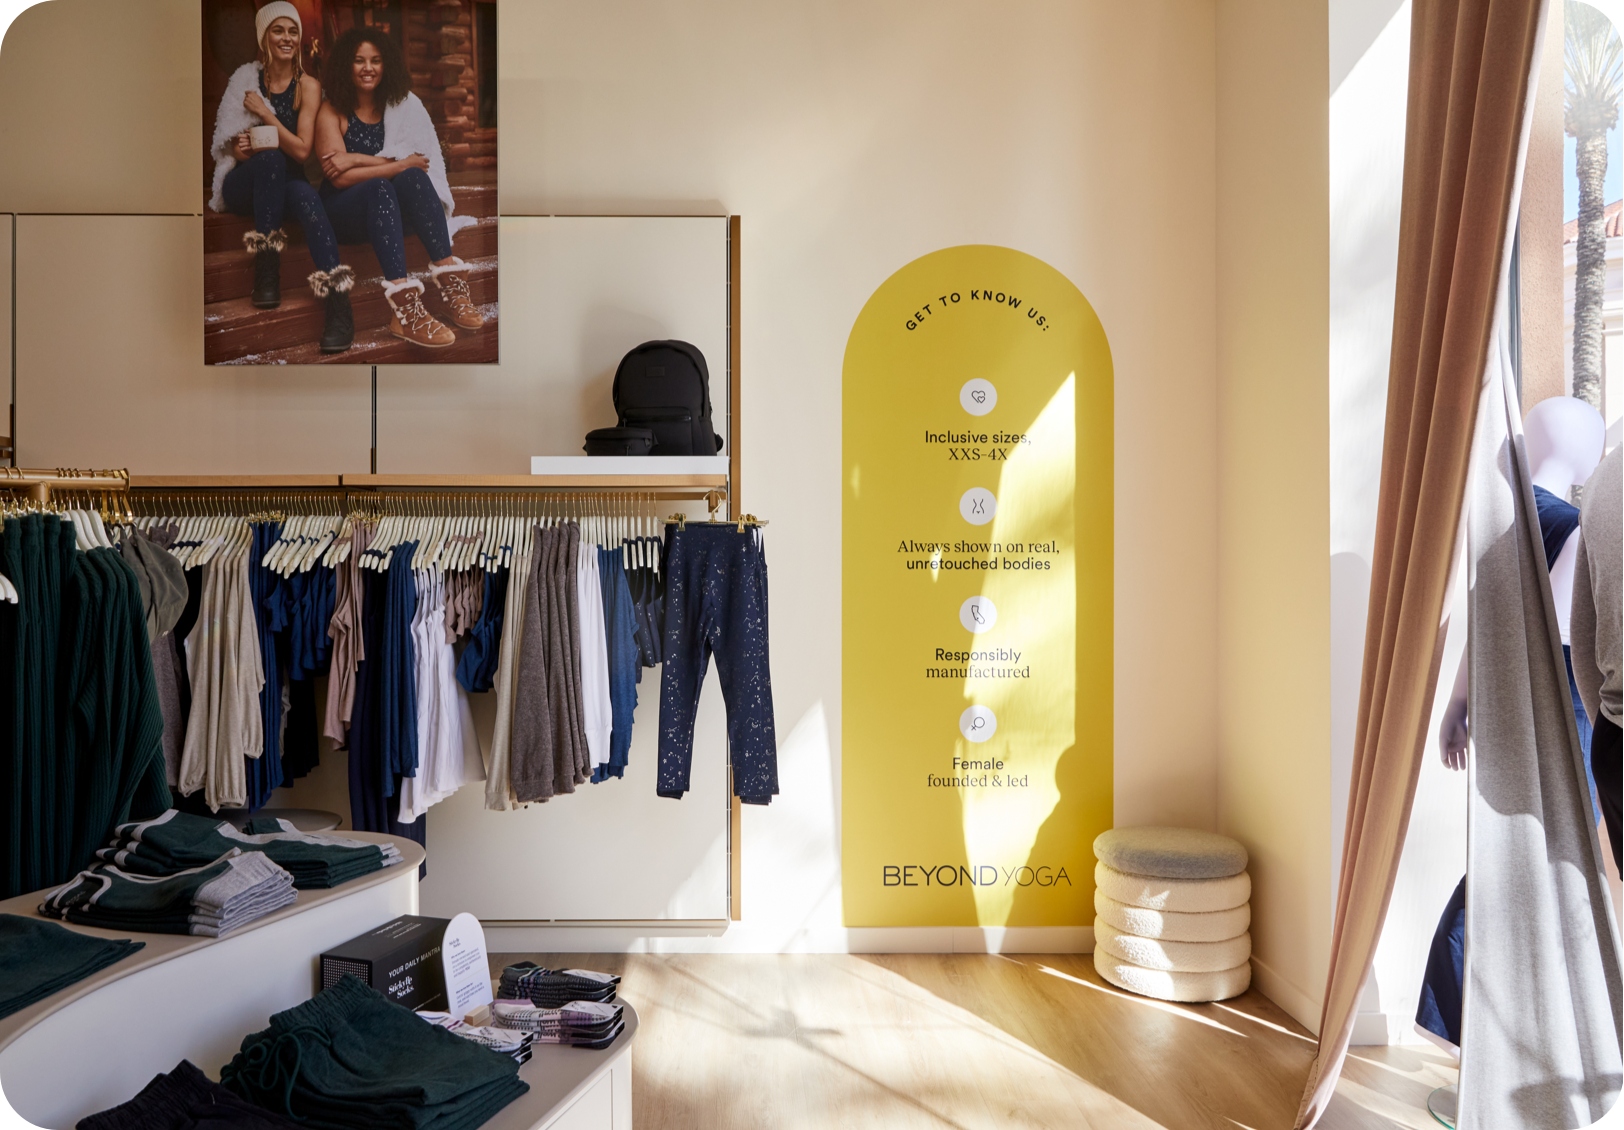 Indoor image of Irvine store with clothing and marketing imagery